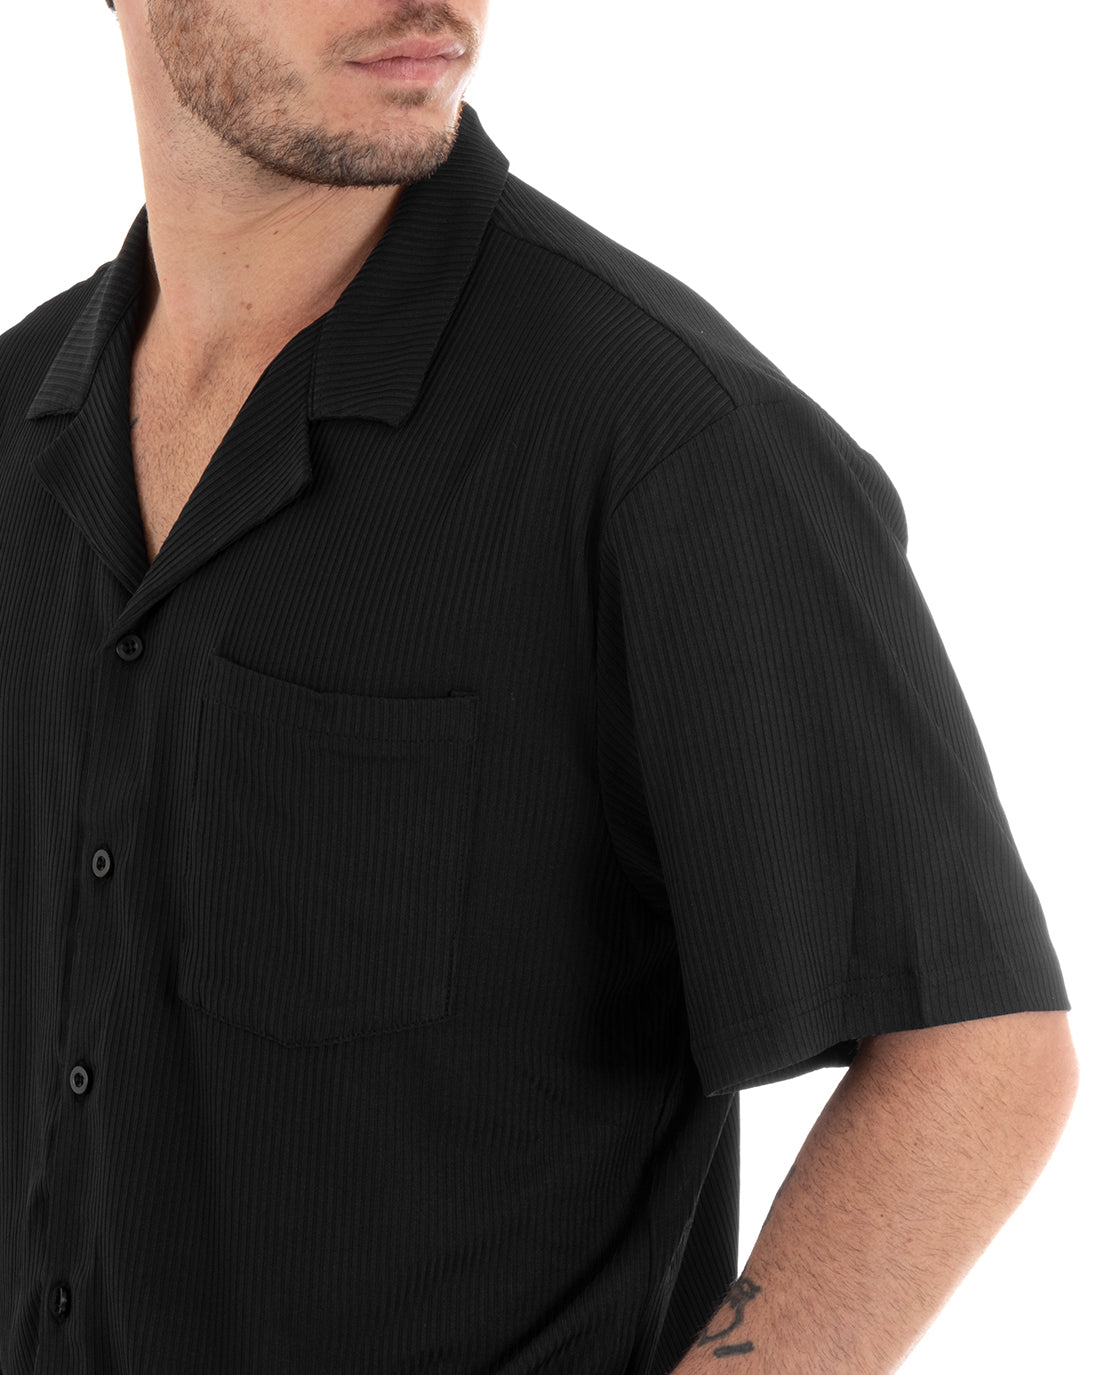 Complete Coordinated Set for Men Viscose Pleated Shirt with Bermuda Collar Outfit Black GIOSAL-OU2283A